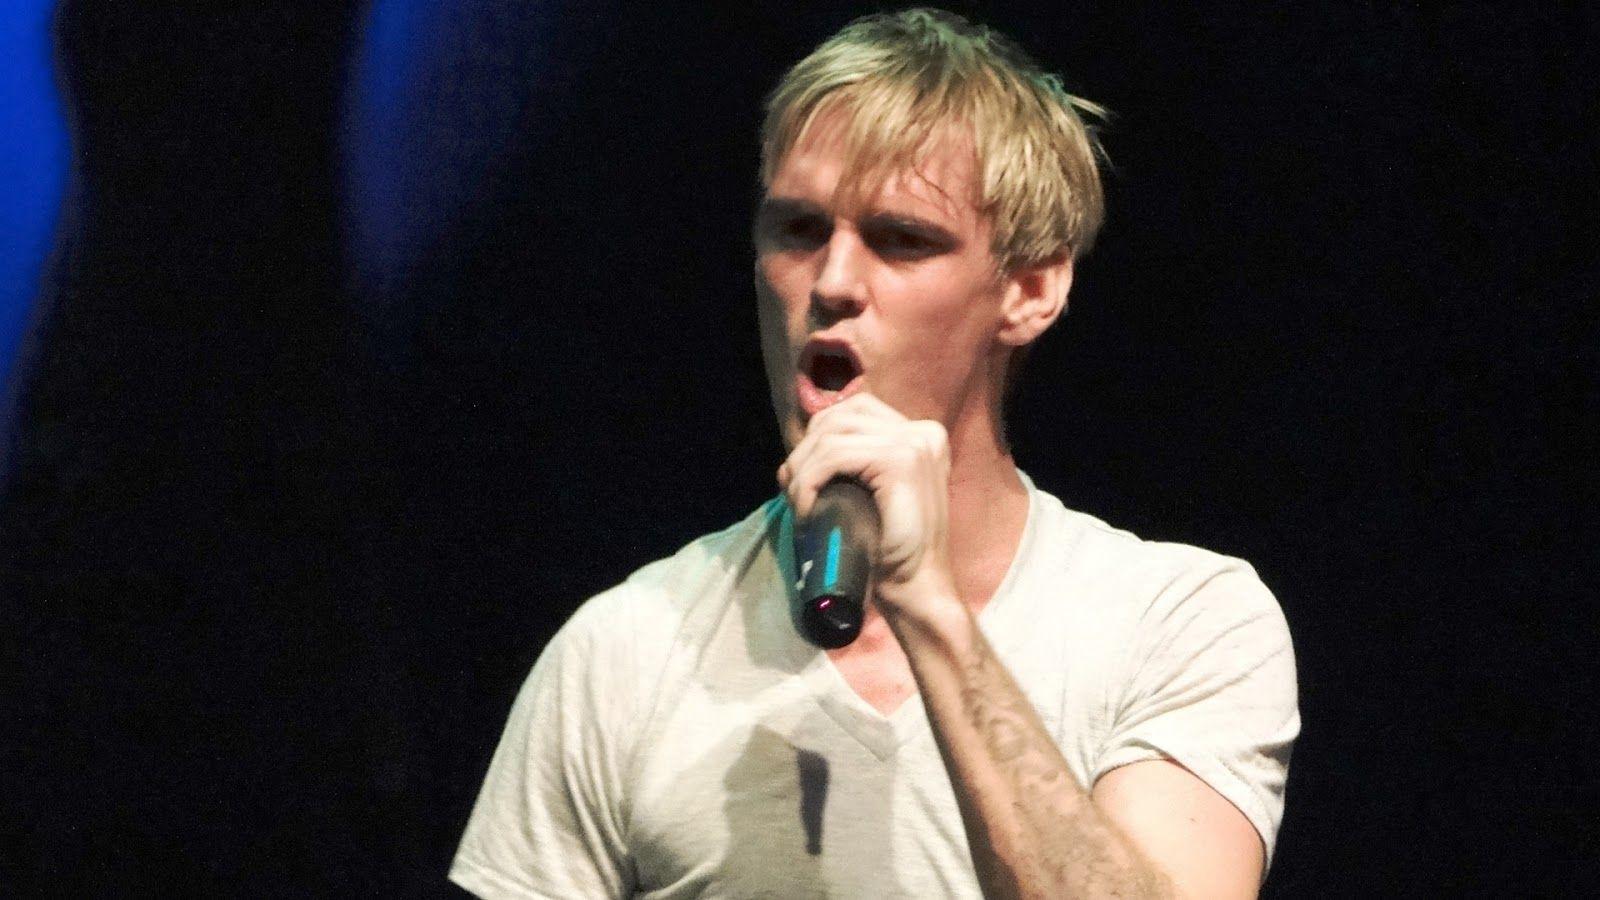 Hollywood Star: Aaron Carter Hollywood Young Singer & Actor